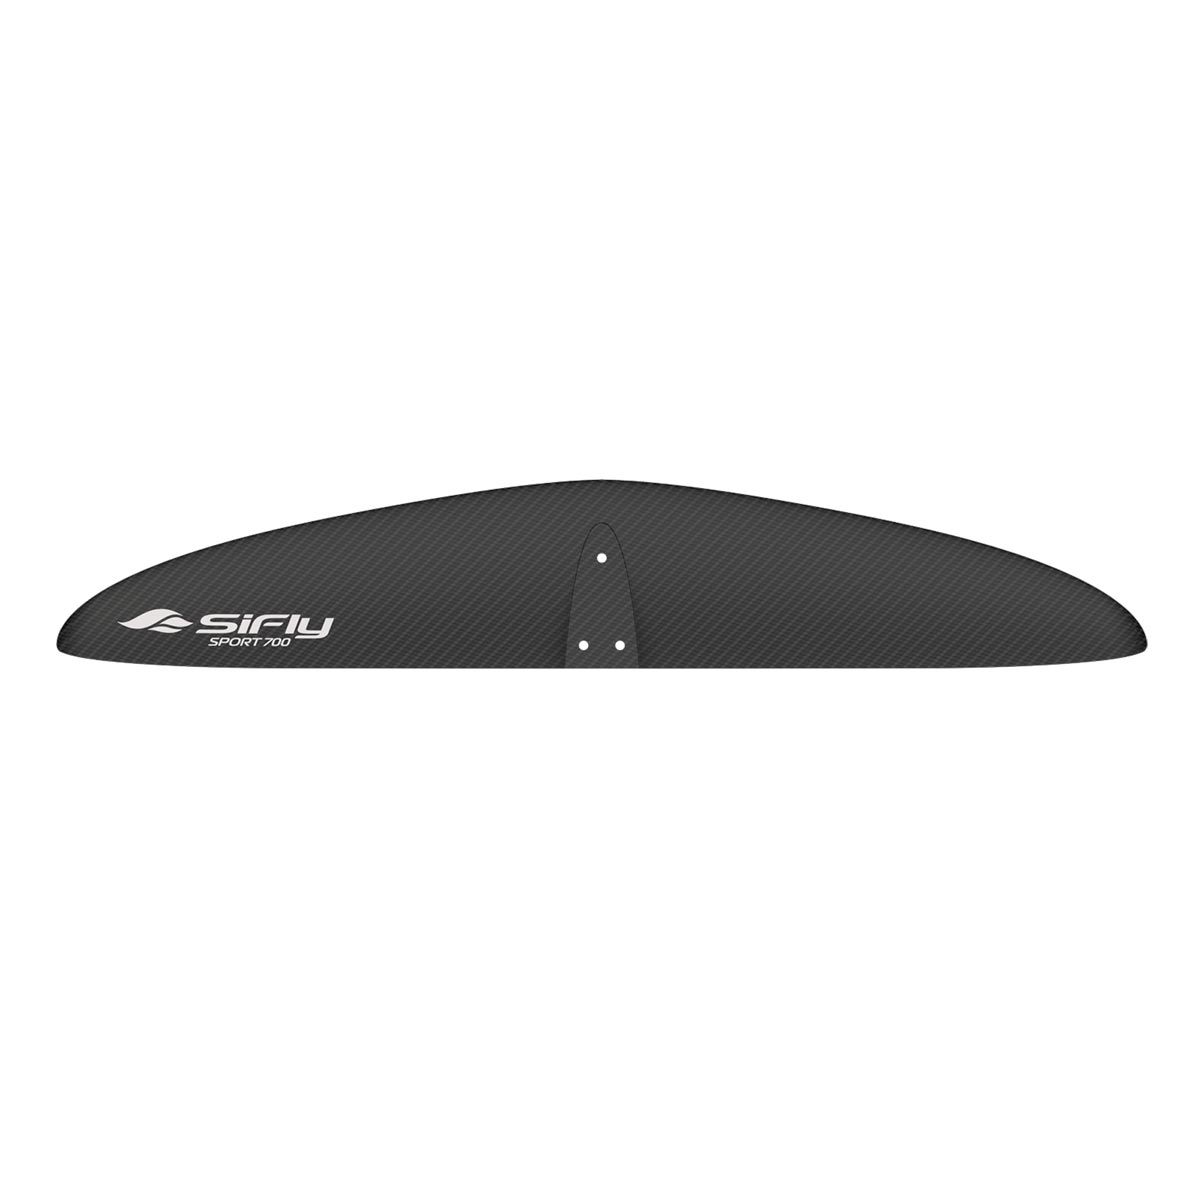 SiFly 700 Sport Wing